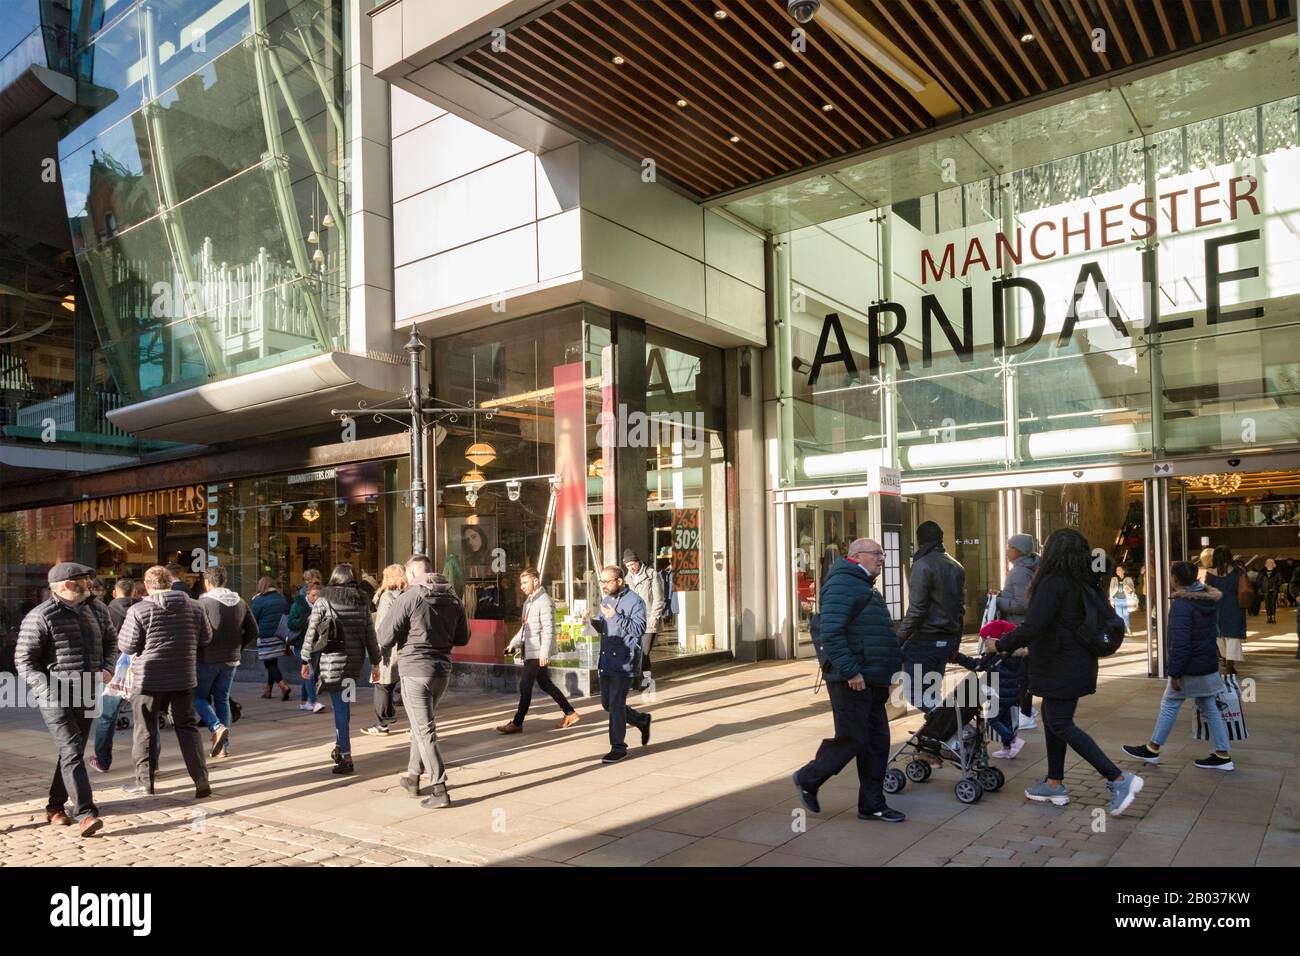 2 November 2019: Manchester, UK - The Arndale Centre, large shopping mall in city centre, pedestrians walking past in the sunshine. Stock Photo